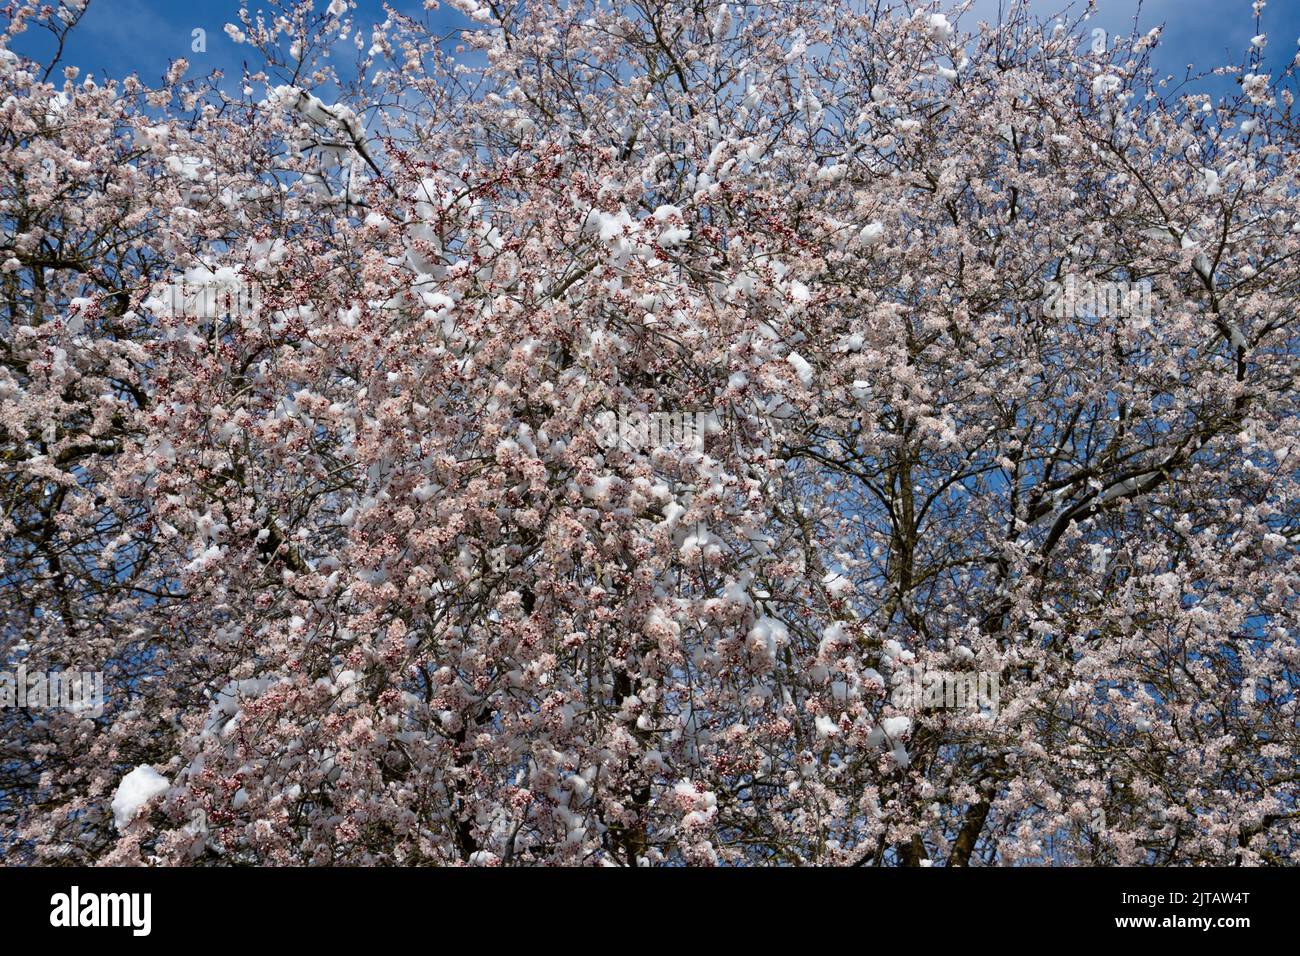 Cherry blossoms covered with snow Stock Photo